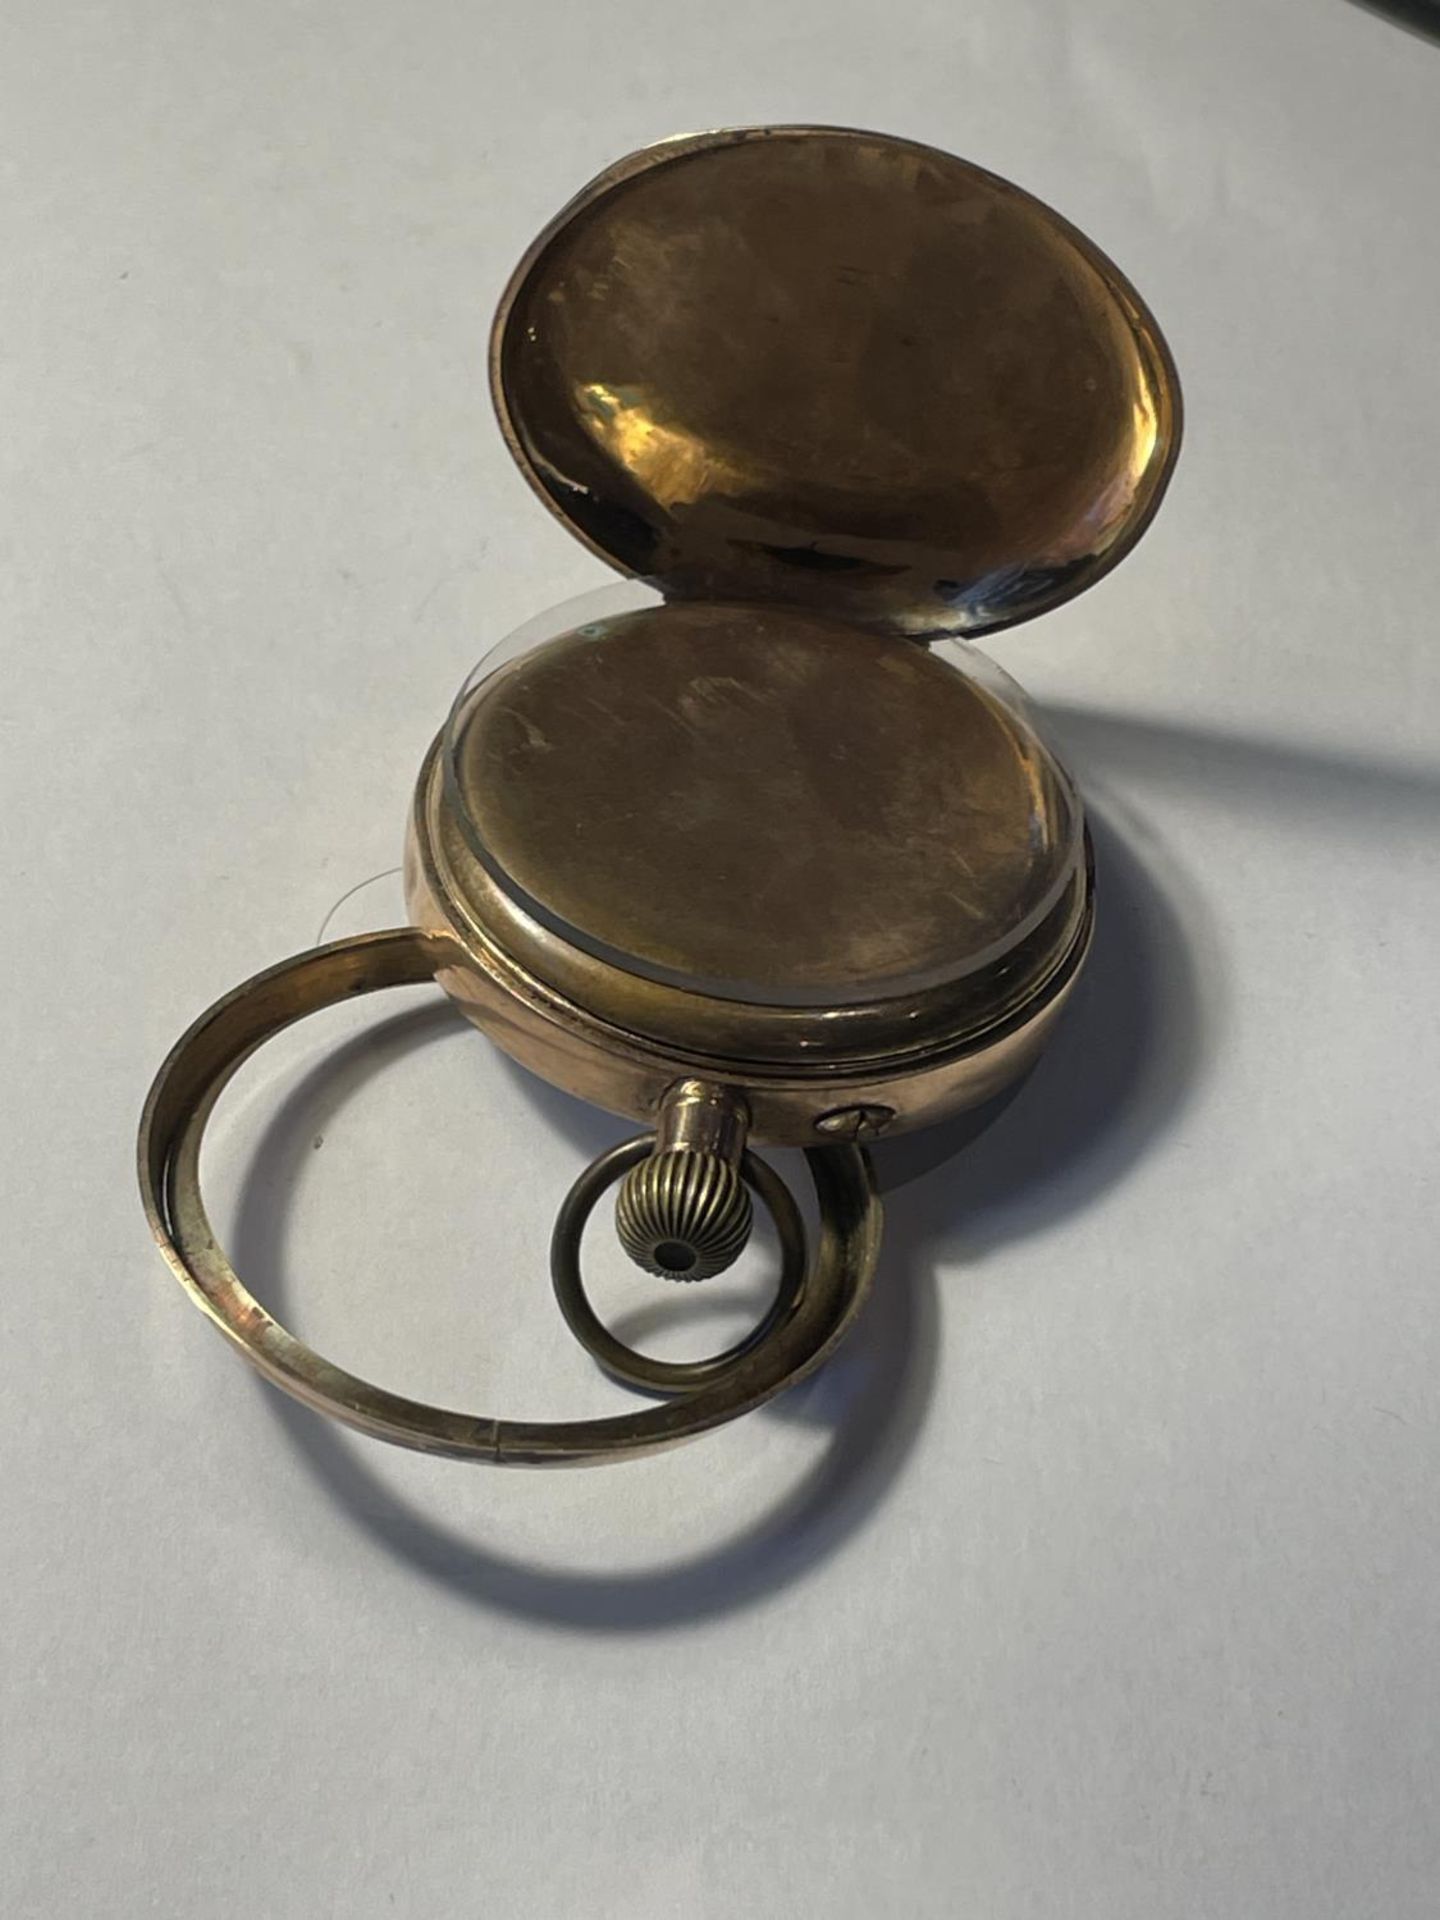 A 9CT GOLD OPEN FACED POCKET WATCH WITH LEVER ESCAPEMENT AND A ROMAN NUMERAL FACE, A/F GROSS - Image 3 of 3